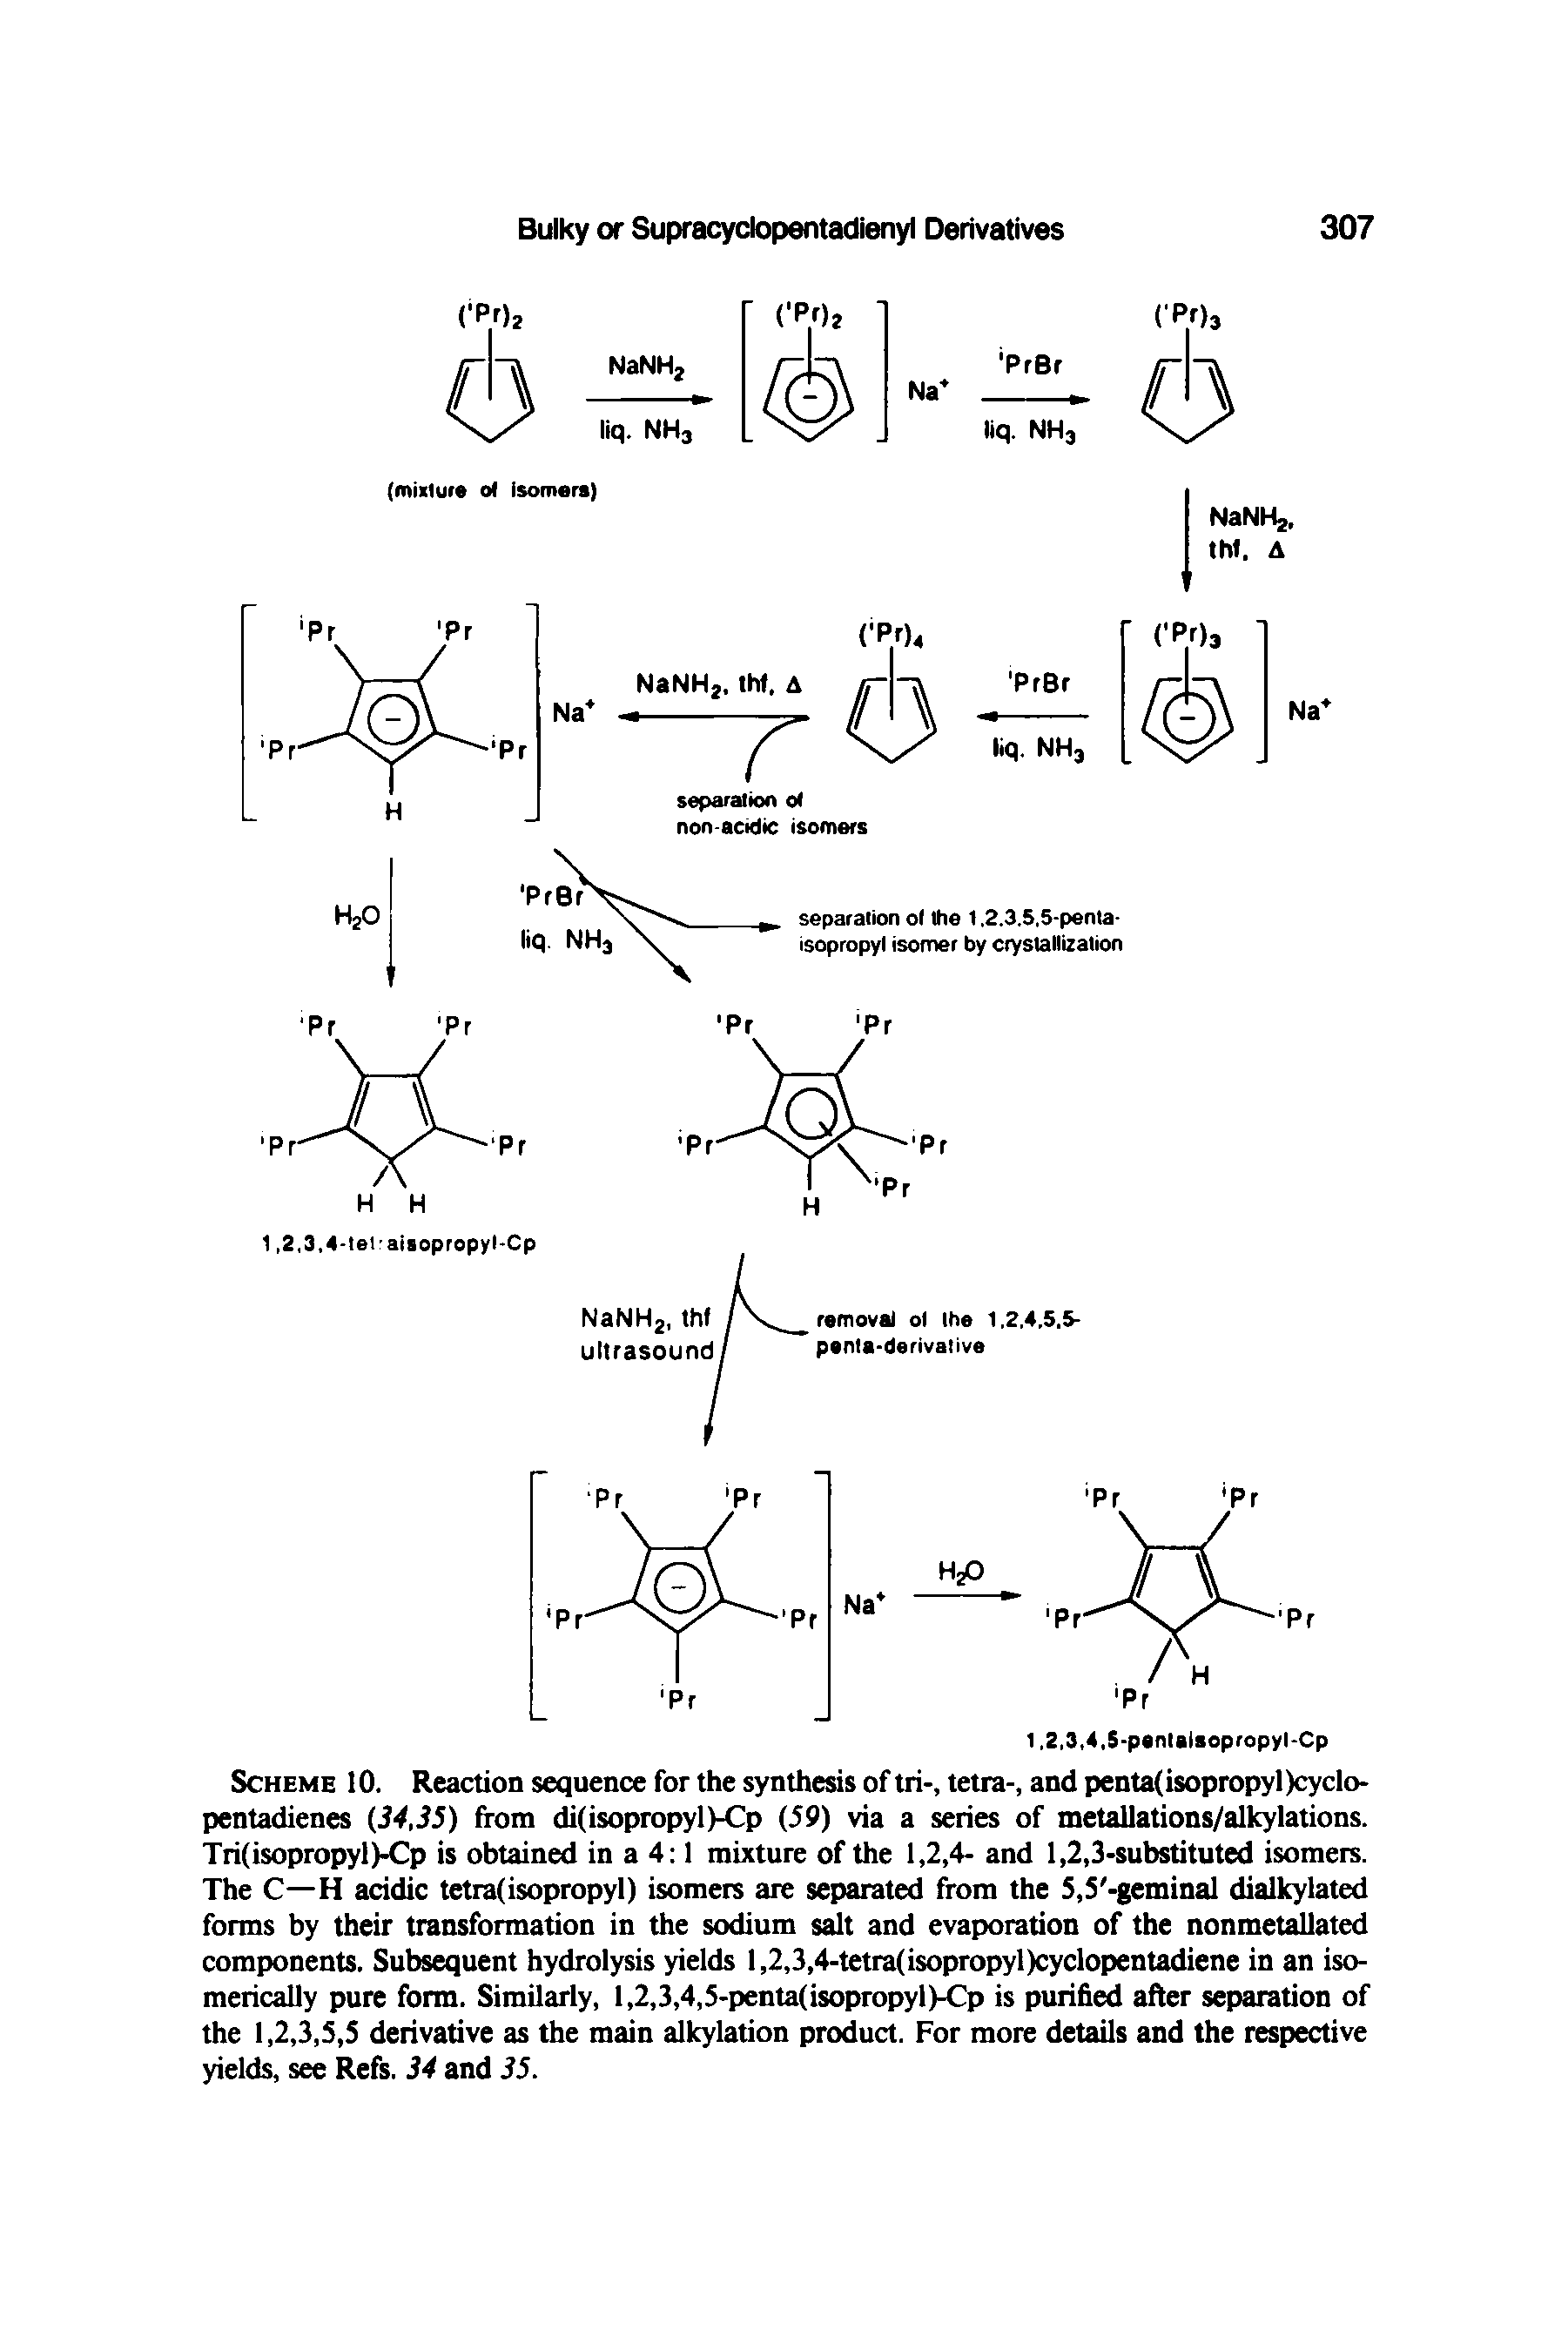 Scheme 10. Reaction sequence for the synthesis of tri-, tetra-, and penta(isopropyl)cyclo-pentadienes (34,35) from di(isopropyl)-Cp (59) via a series of metallations/alkylations. Tri(isopropyl)-Cp is obtained in a 4 1 mixture of the 1,2,4- and 1,2,3-substituted isomers. The C—H acidic tetra(isopropyl) isomers are separated from the 5,5 -geminal dialkylated forms by their transformation in the sodium salt and evaporation of the nonmetallated components. Subsequent hydrolysis yields l,2,3,4-tetra(isopropyl)cyclopentadiene in an iso-merically pure form. Similarly, l,2,3,4,5-penta(isopropyl)-Cp is purified after separation of the 1,2,3,S,5 derivative as the main alkylation product. For more details and the respective yields, see Refs. 34 and 35.